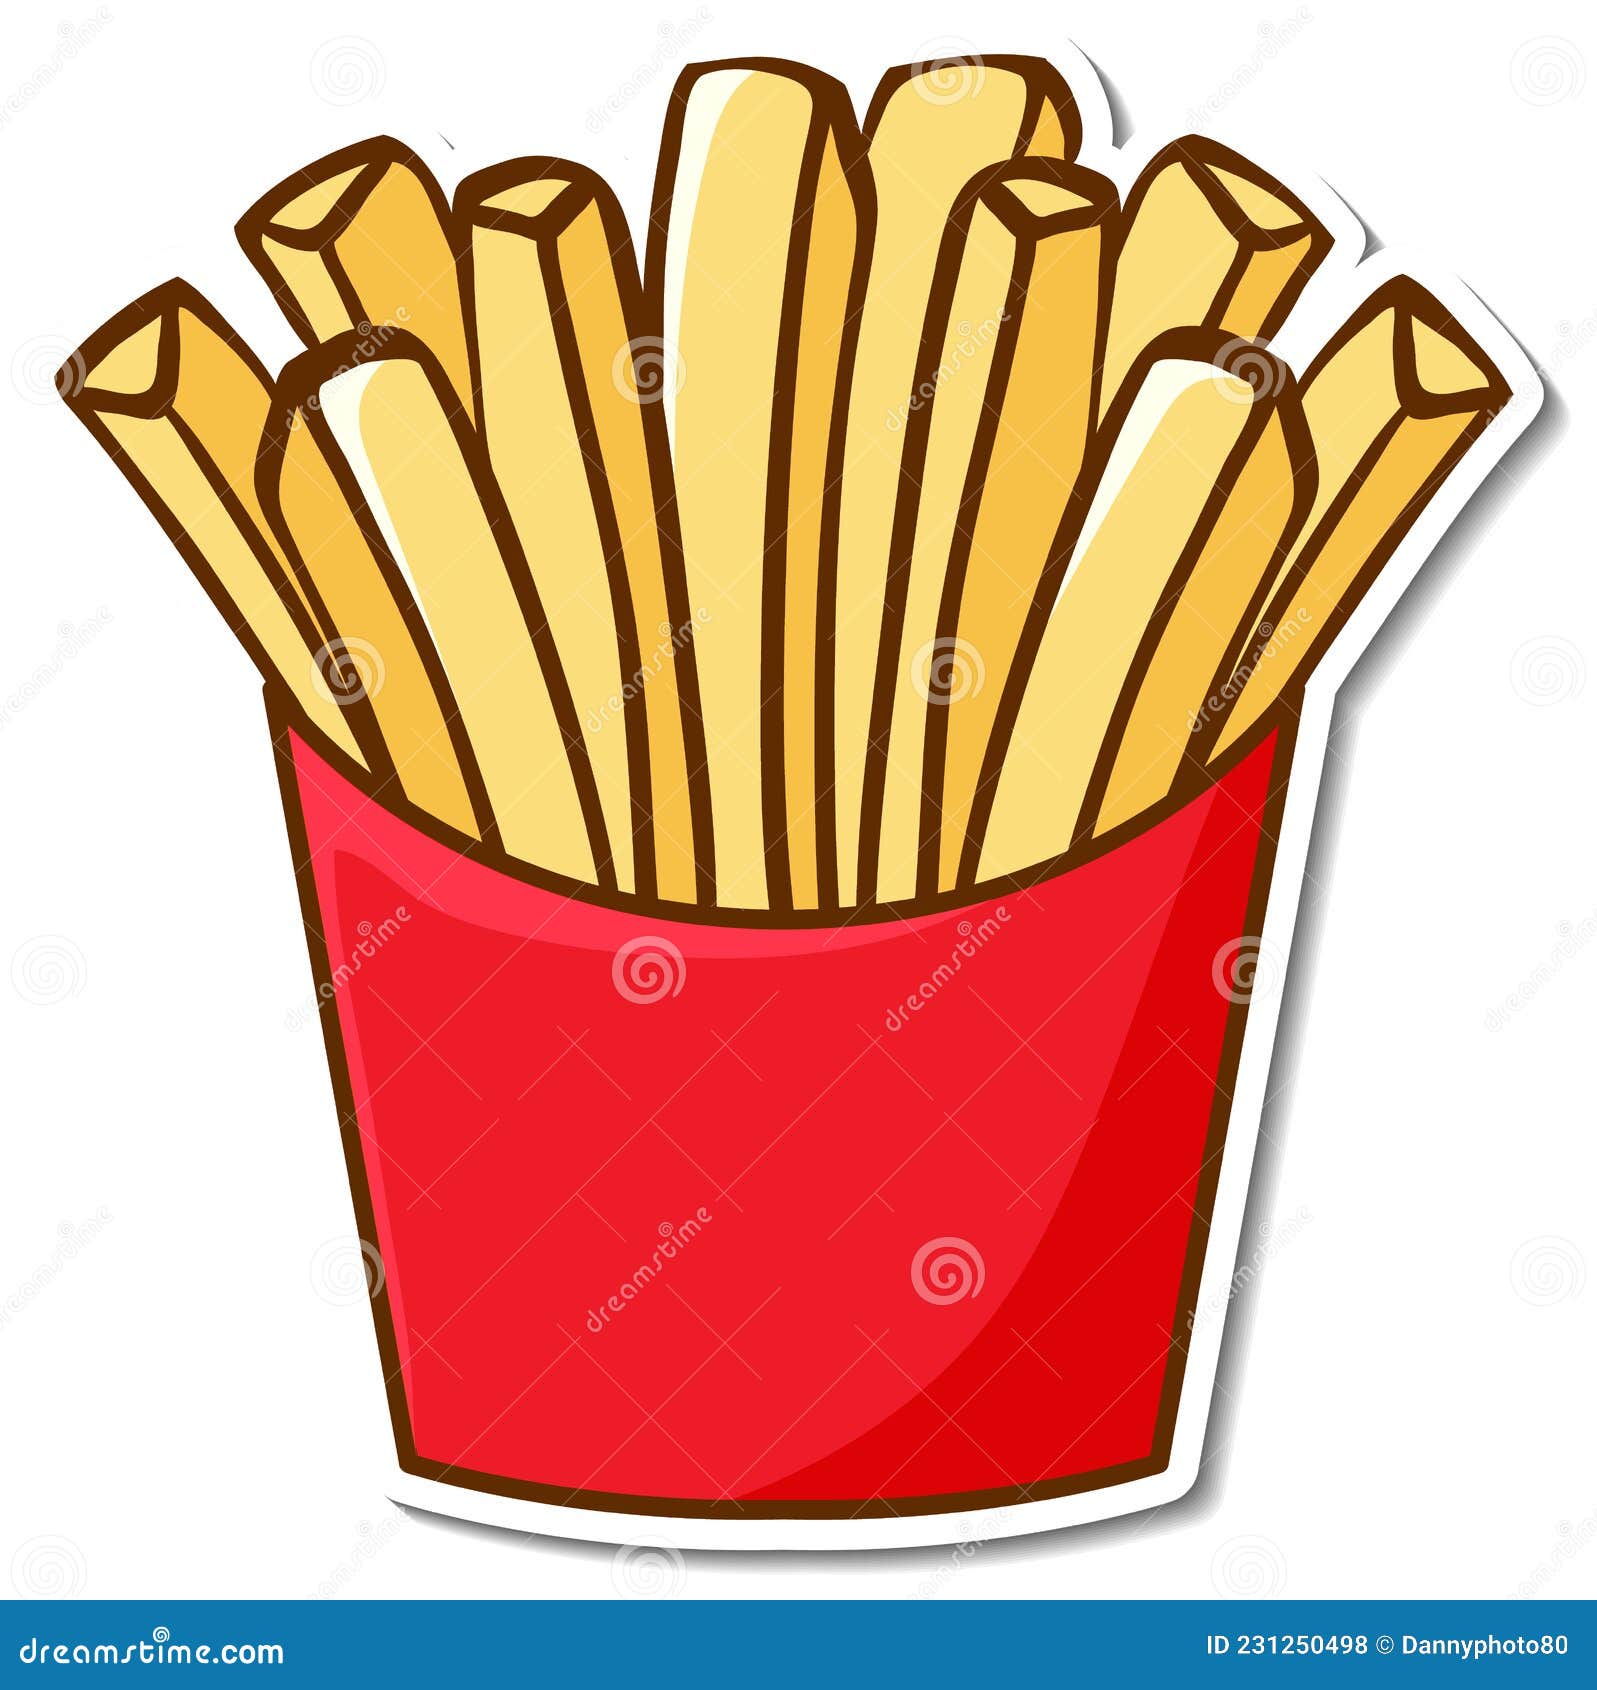 Fast Food Sticker Design with French Fries Isolated Stock Vector ...